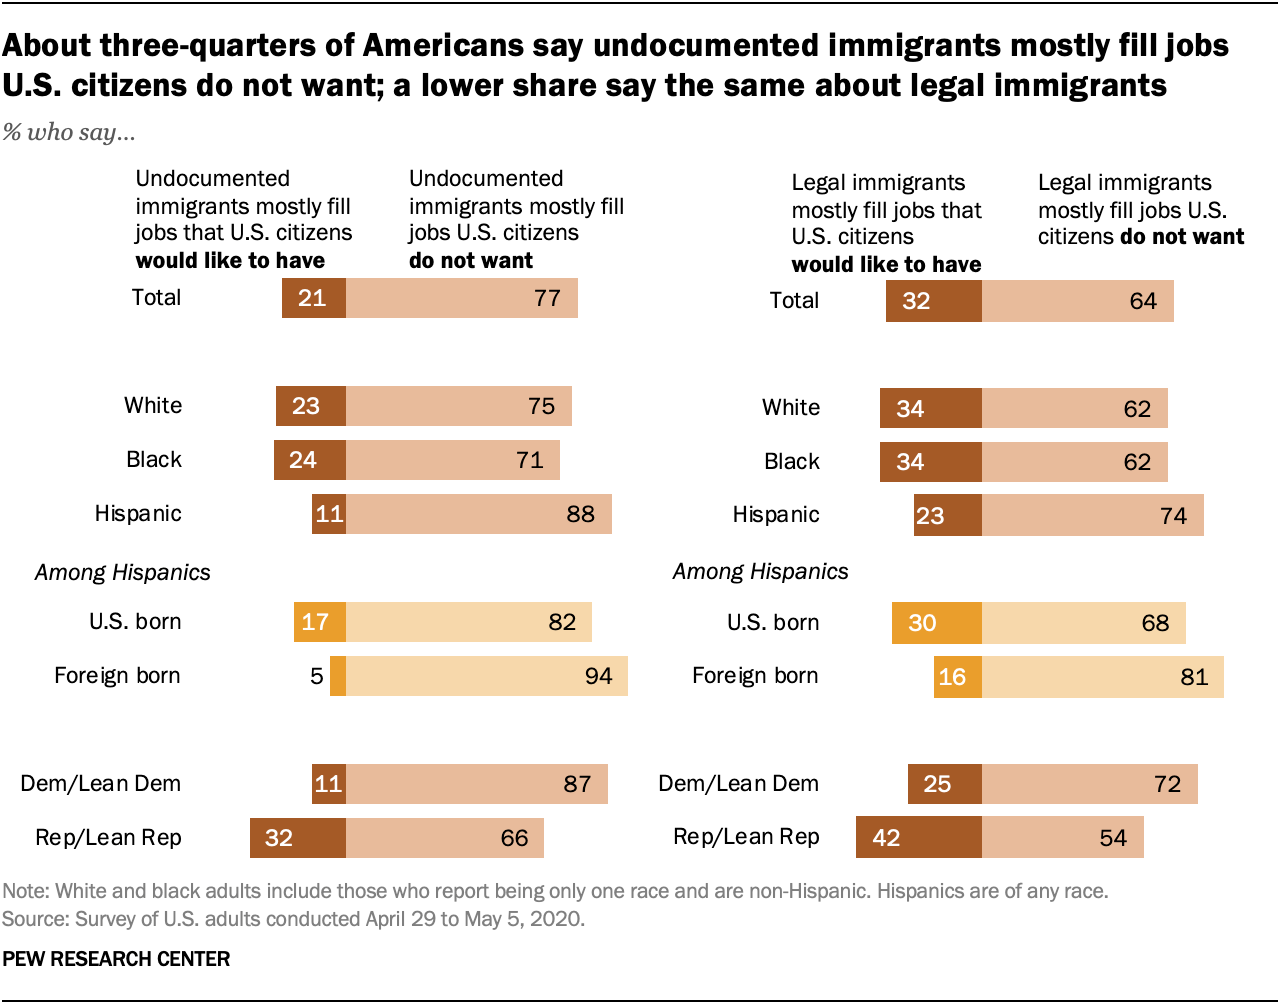 About three-quarters of Americans say undocumented immigrants mostly fill jobs U.S. citizens do not want; a lower share say the same about legal immigrants